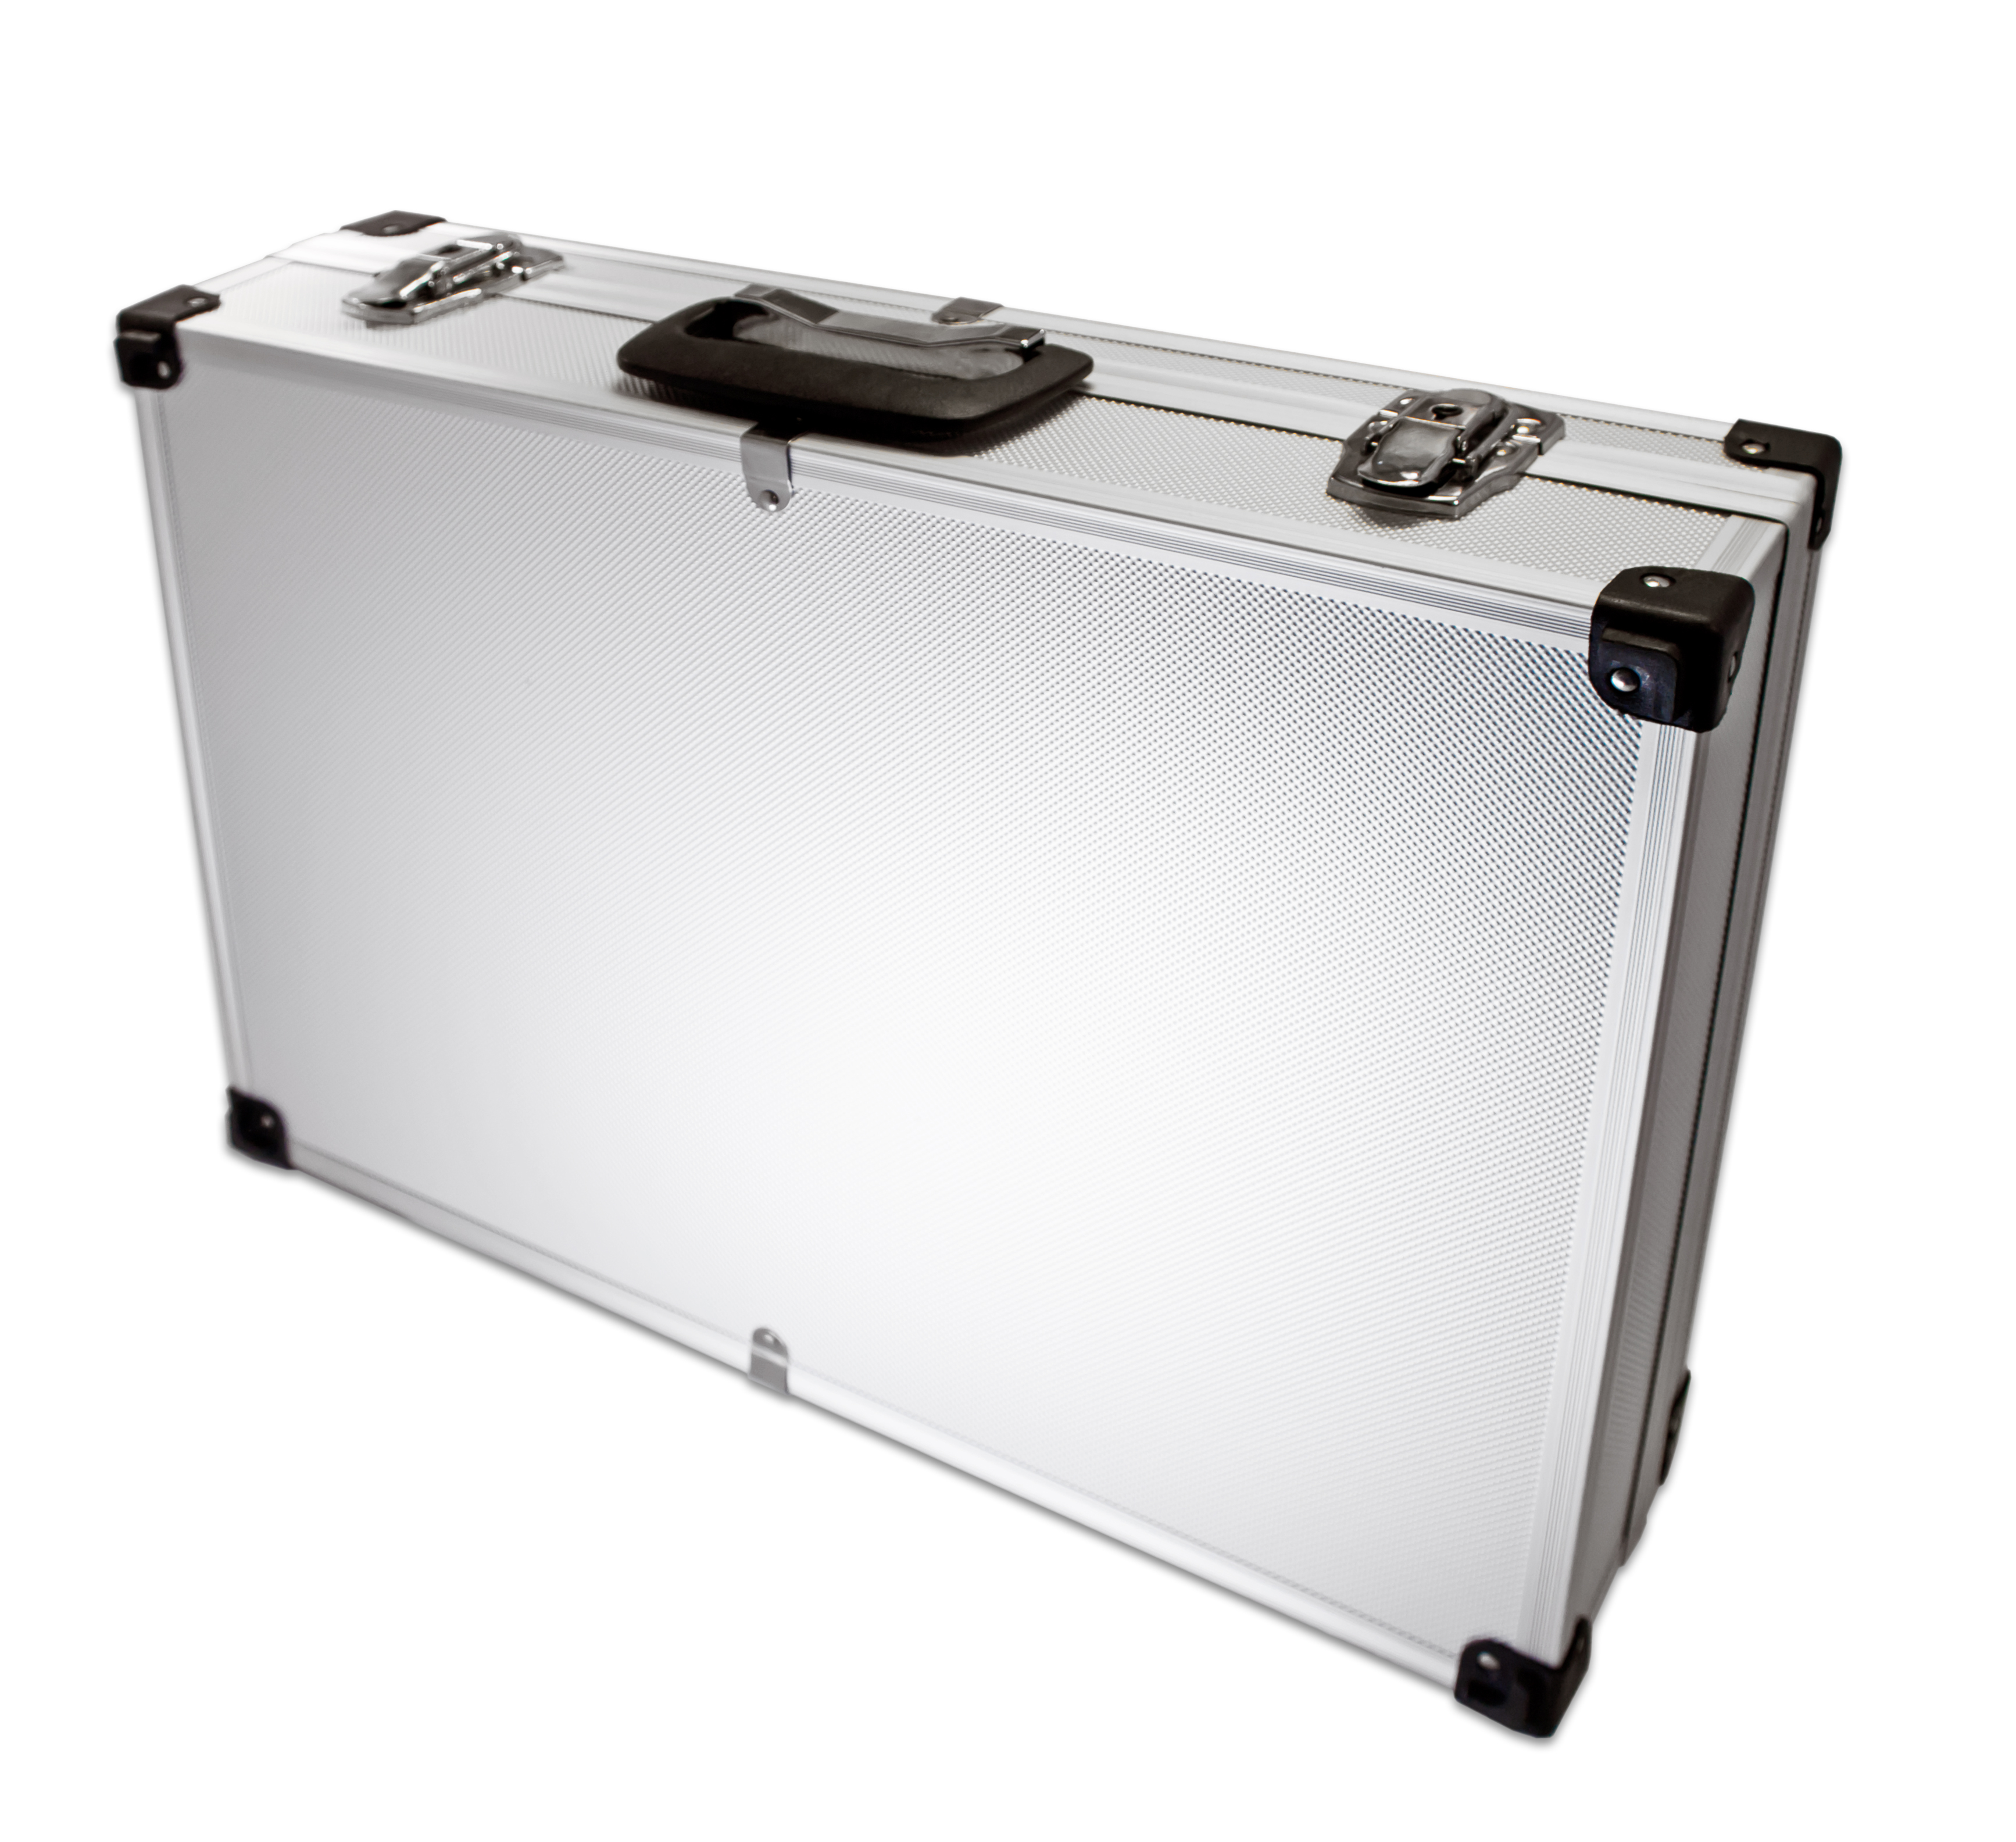 «PeakTech® P 7265» Carrying Case for Measurement Instruments